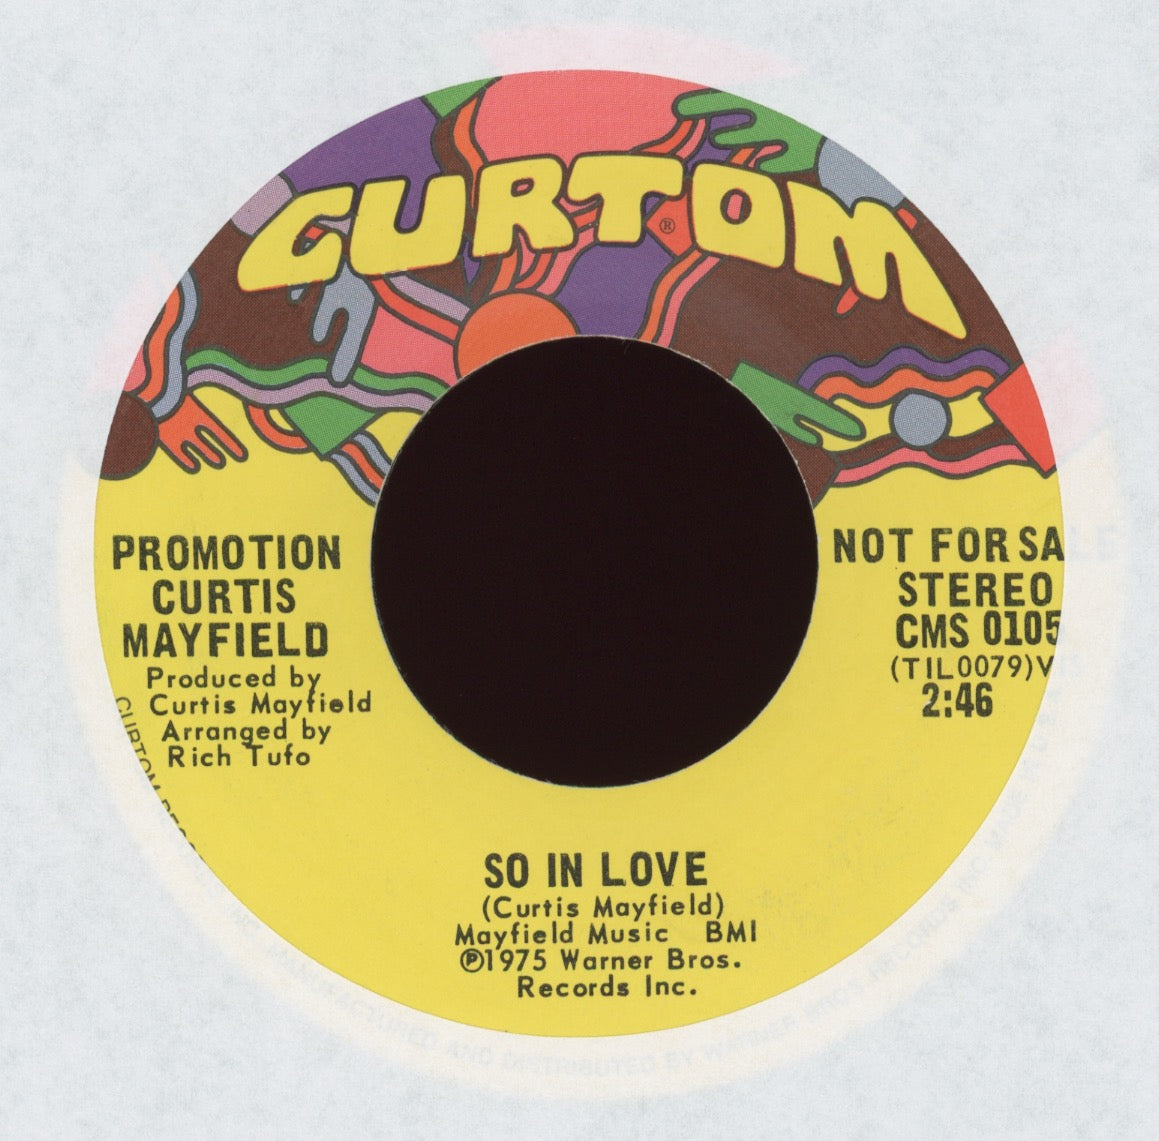 Curtis Mayfield - So In Love on Curtom Promo